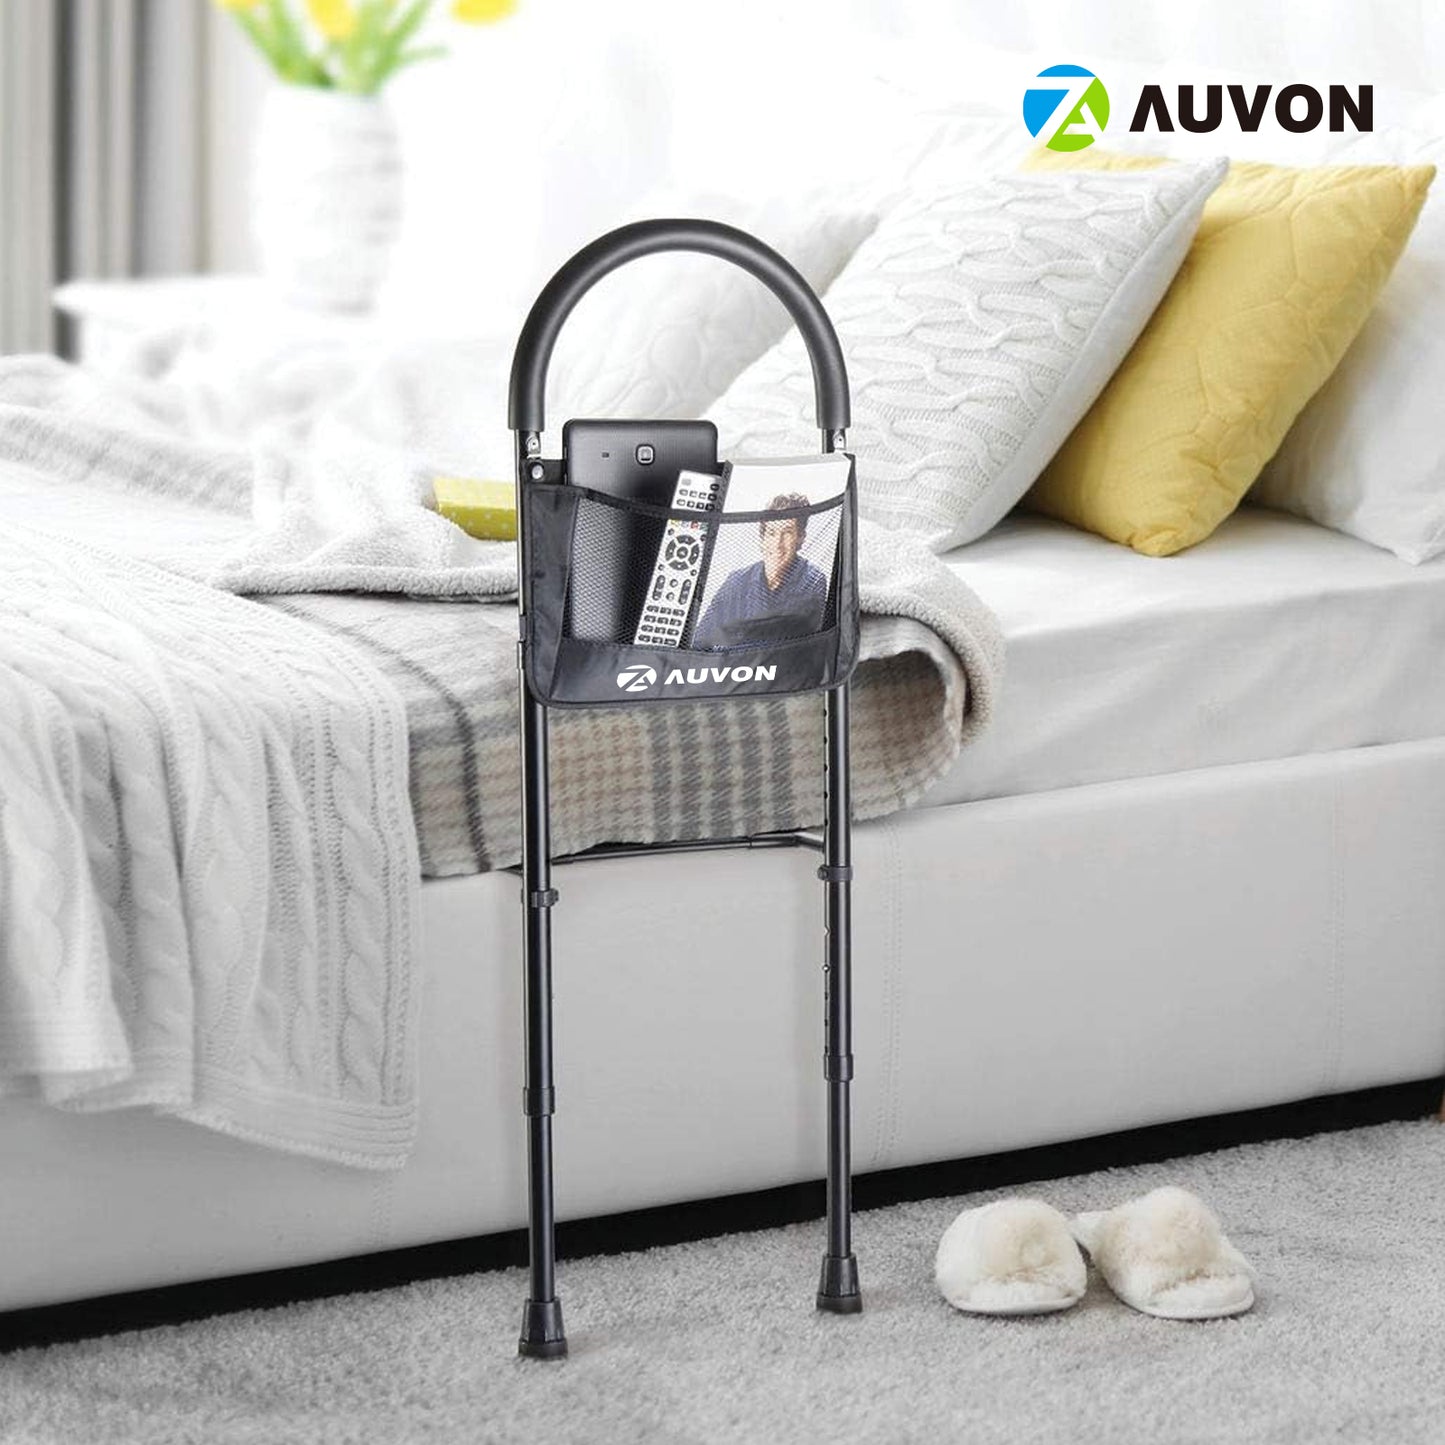 AUVON Bed Assist Rail with Adjustable Heights - with Storage Pocket - for Seniors with Hand Assistant bar - Easy to get in or Out of Bed Safely with Floor Support